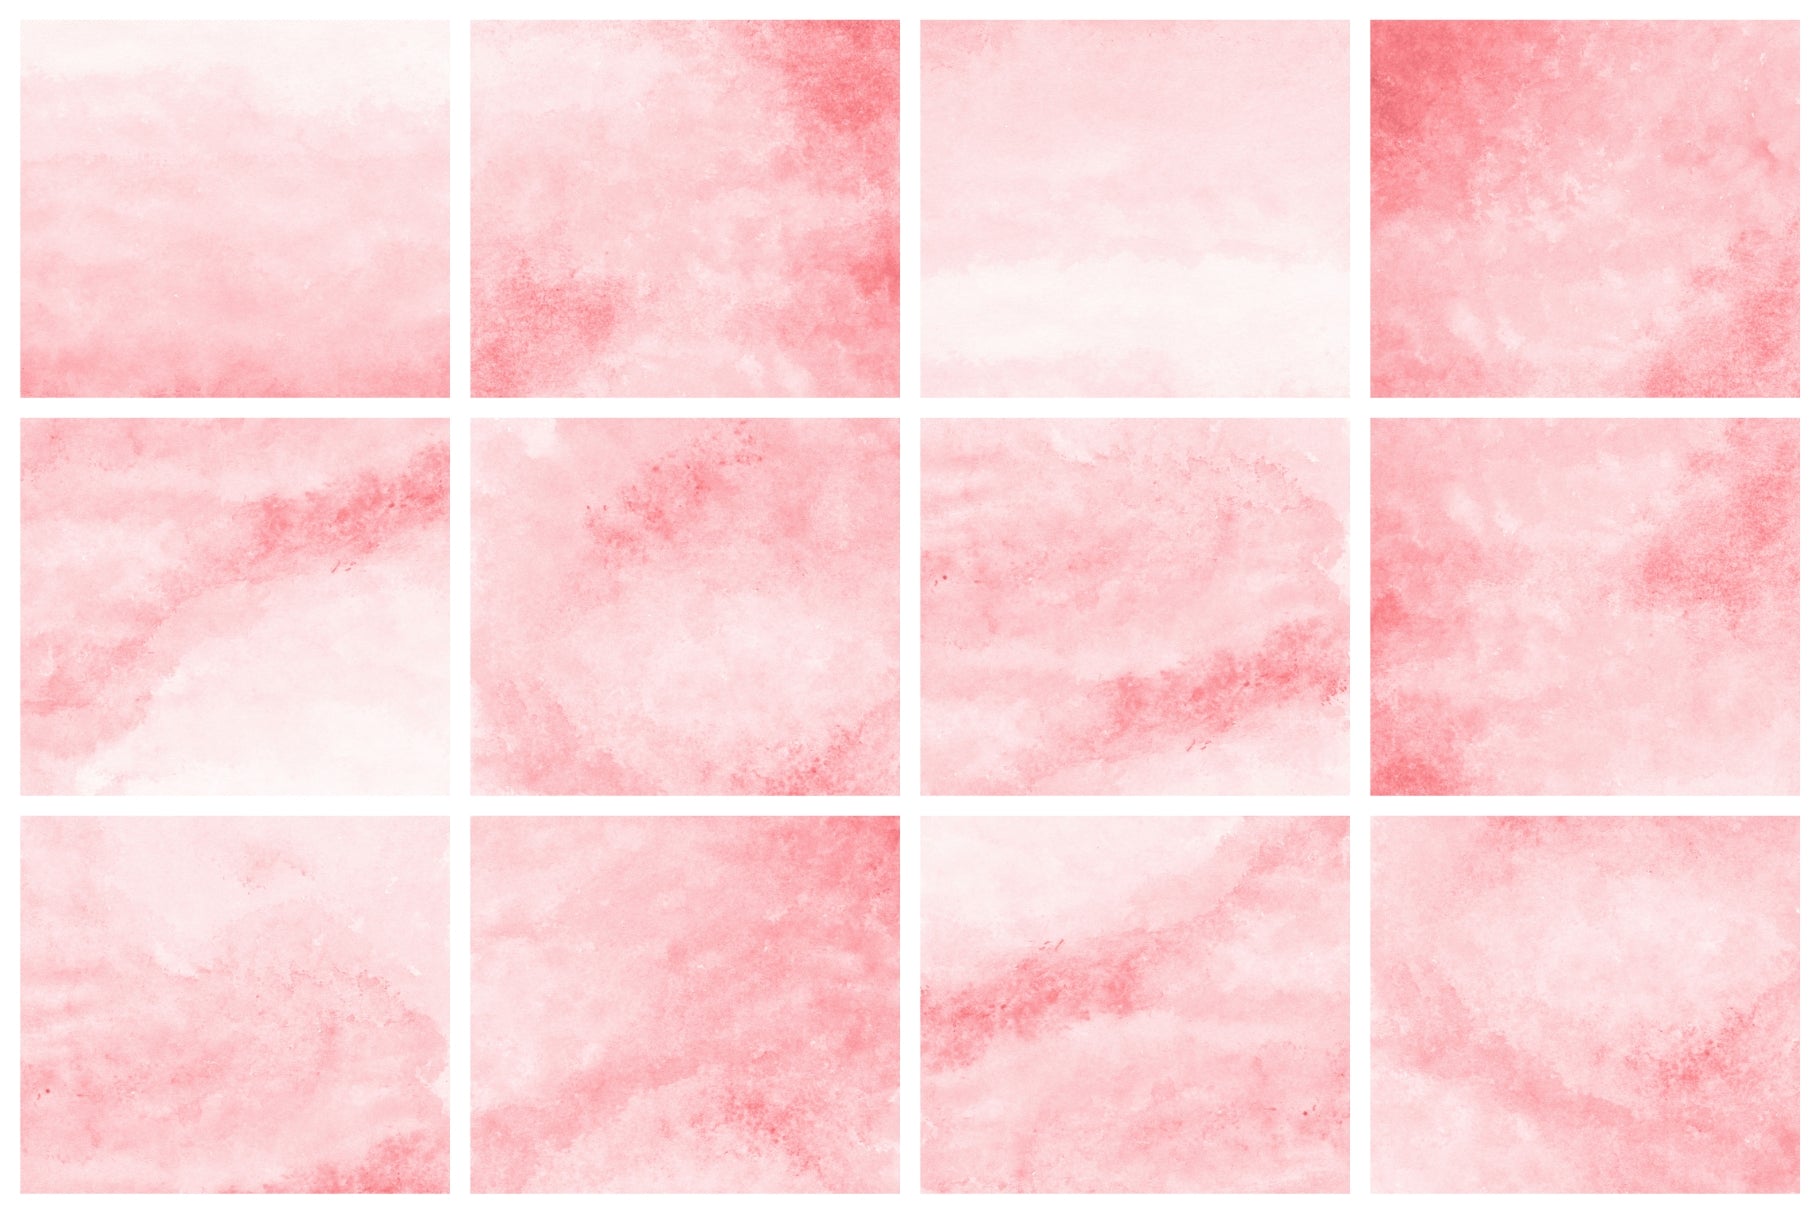 Watercolor Texture Backgrounds 01 Coral Red Watercolor Textures